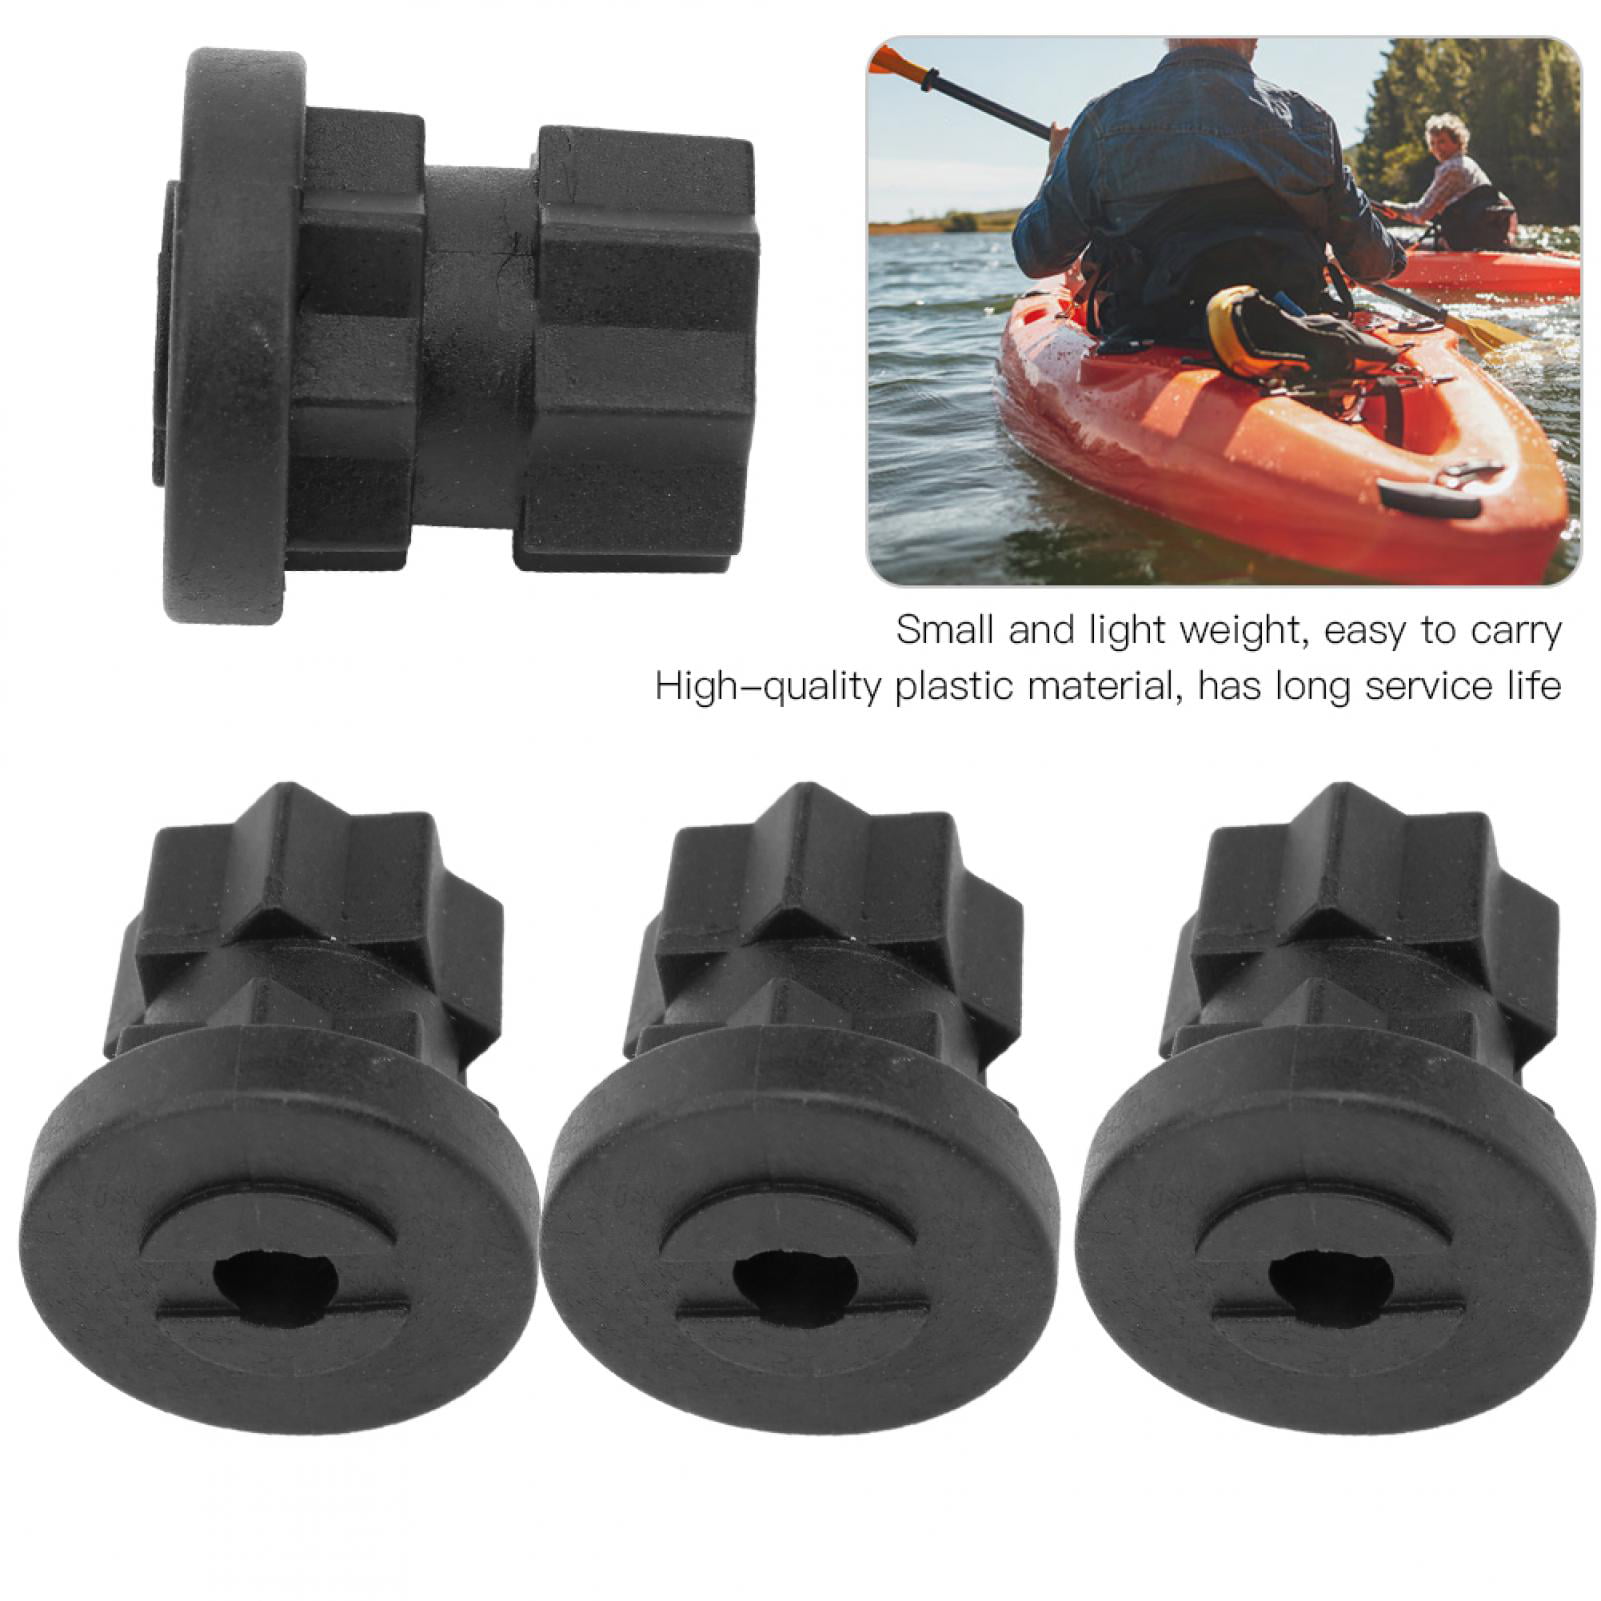 4x Inflatable Kayak Engine Holder Outboard Motor Stand Support Patch Clip 